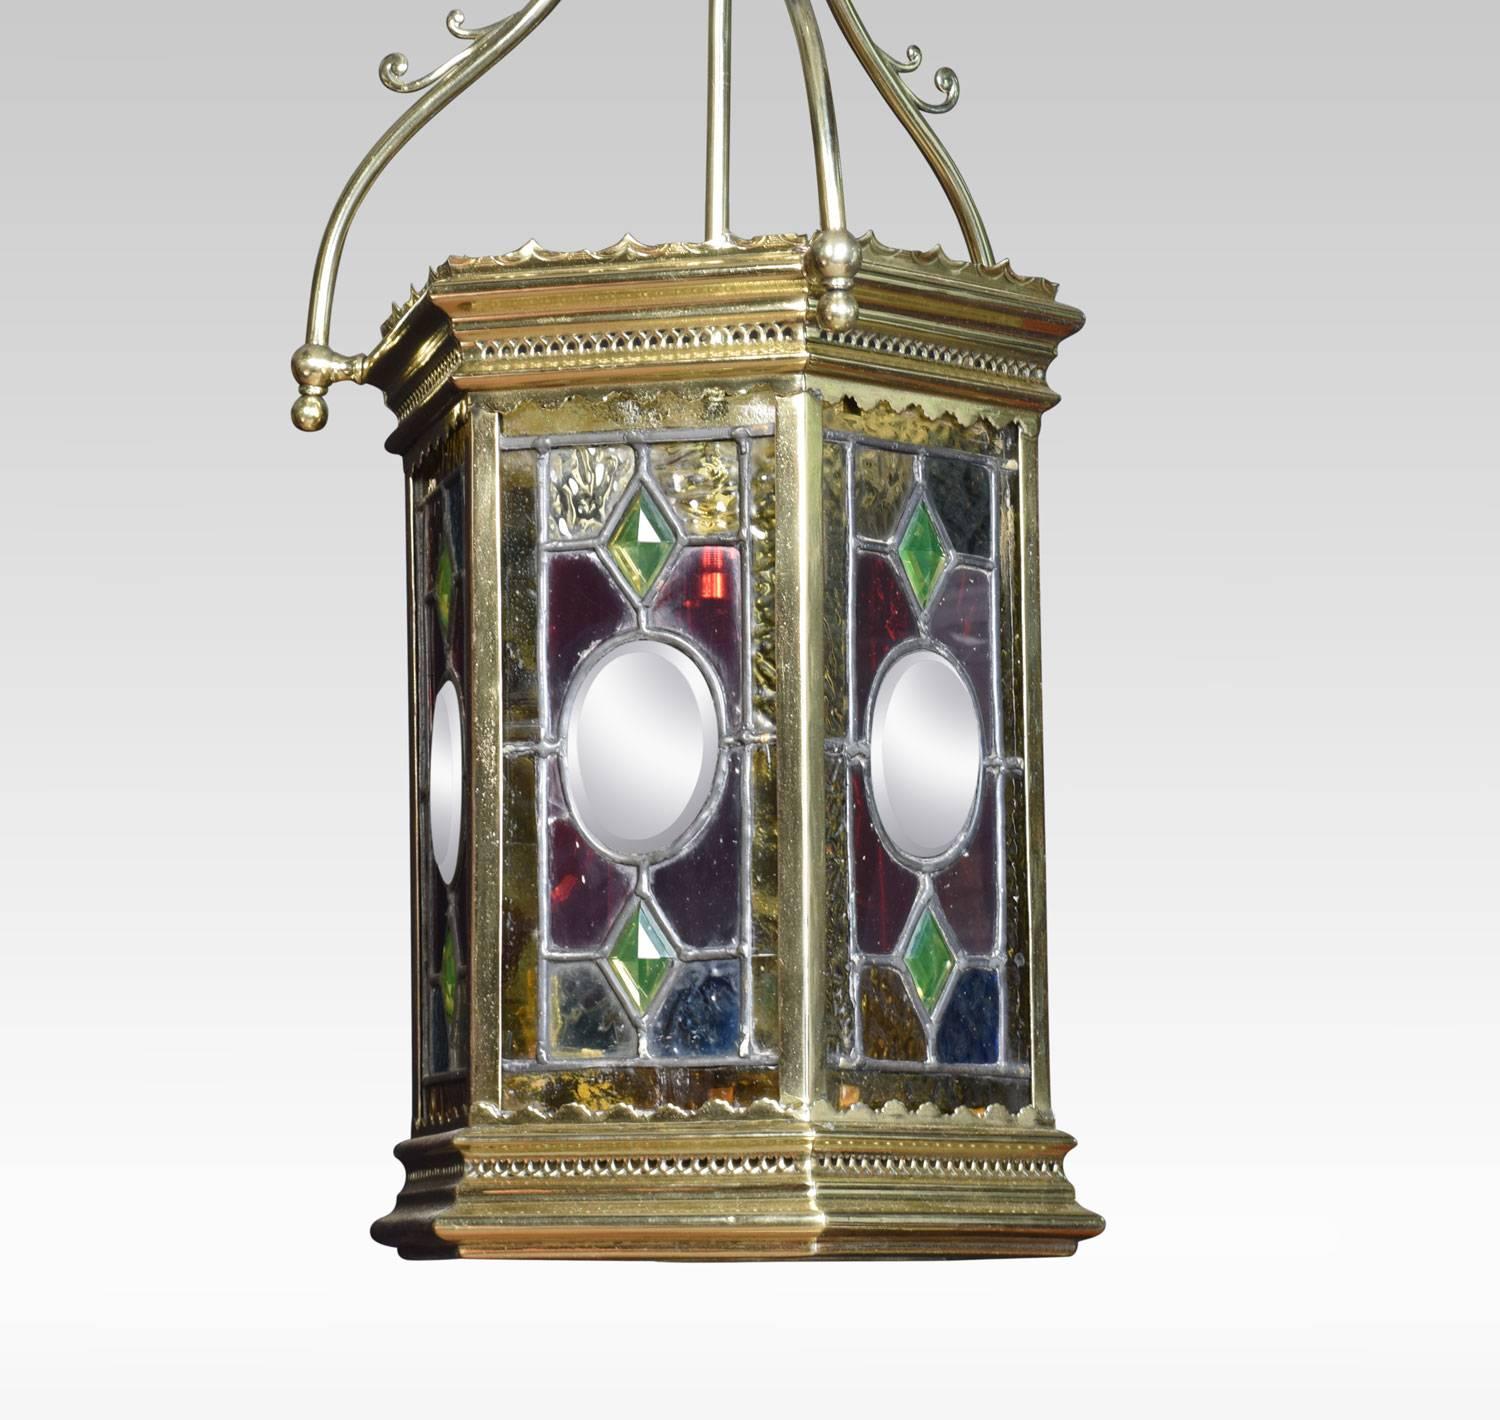 Late 19th century brass hexagonal hall lantern with stained and leaded glass panels. The lantern has been rewired.
Dimensions:
Height 30.5 inches
Width 10 inches
Depth 10 inches.